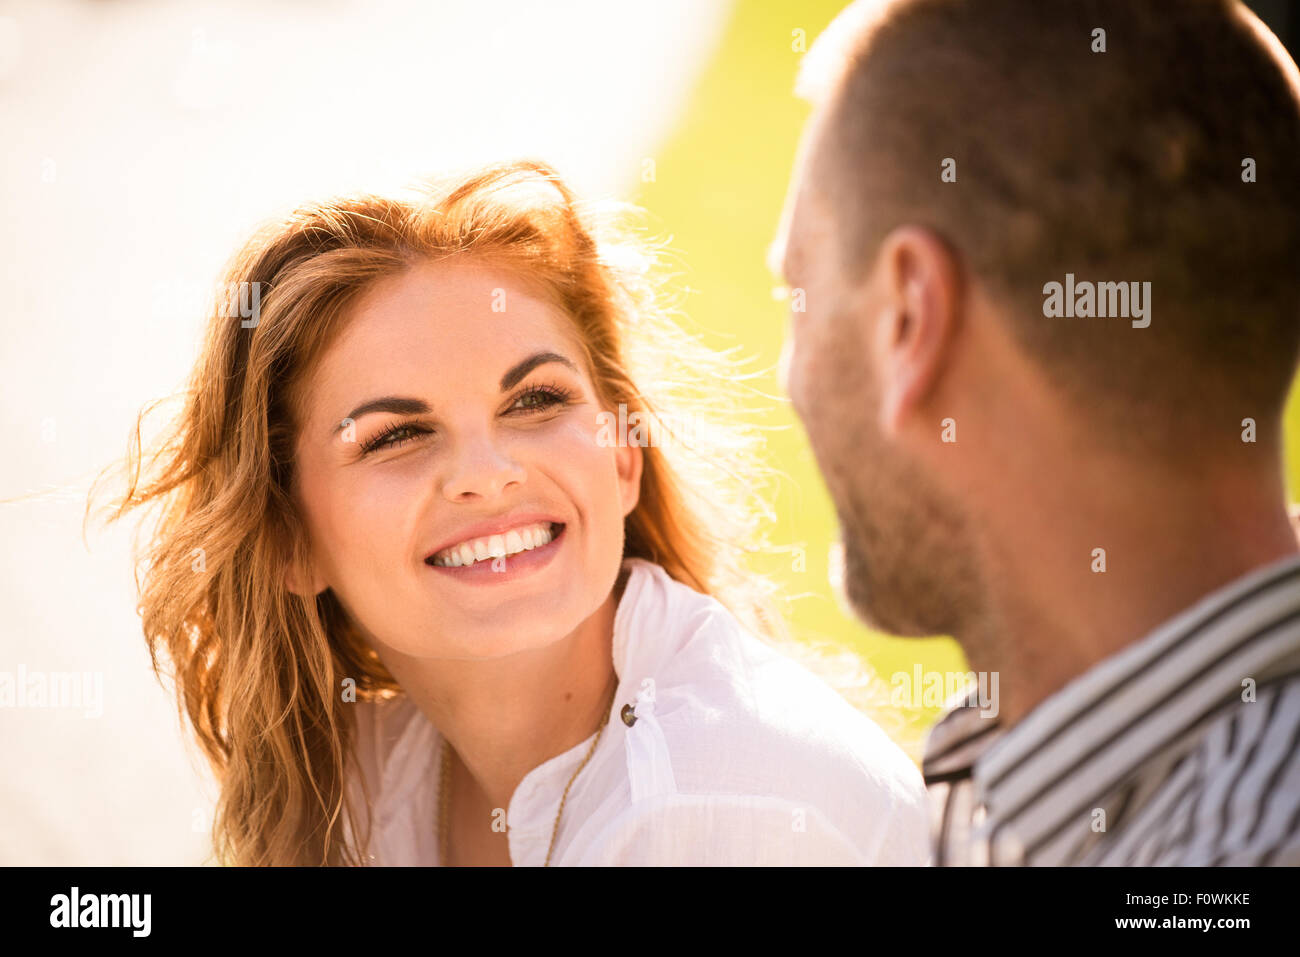 Smiling young woman looking to eyes of her man on date outdoors Stock Photo